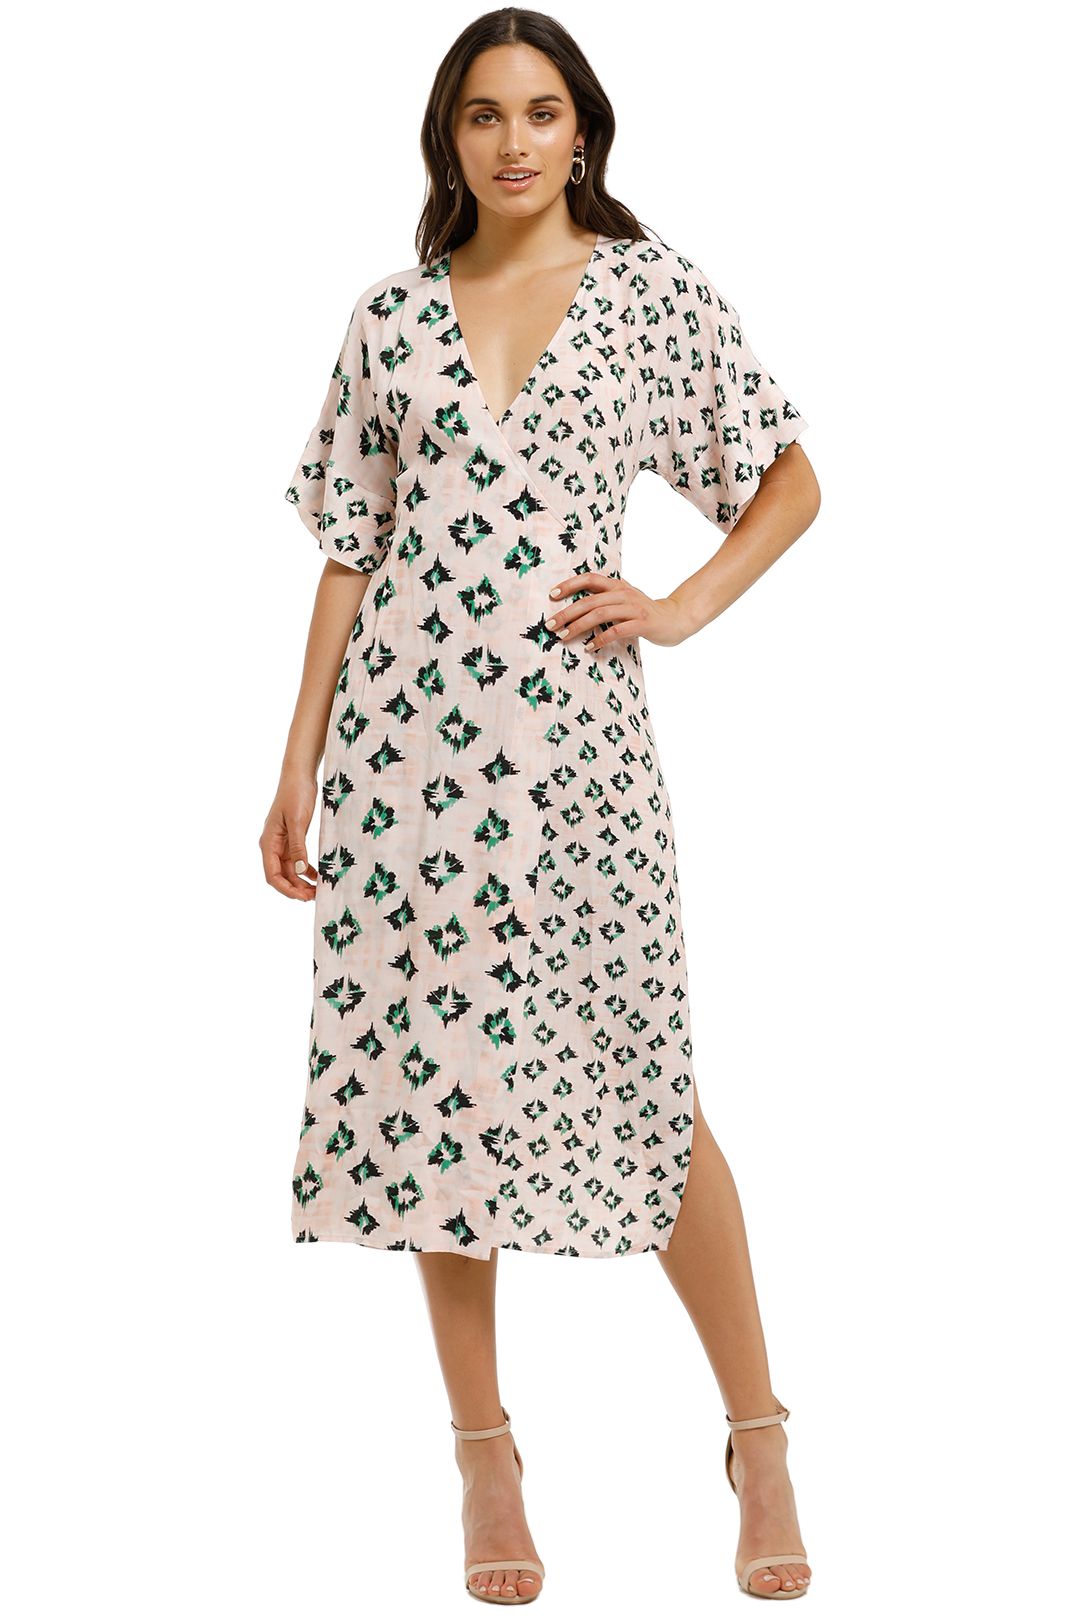 Suboo-On-The-Fly-Wrap-Dress-Pink-Green-Front